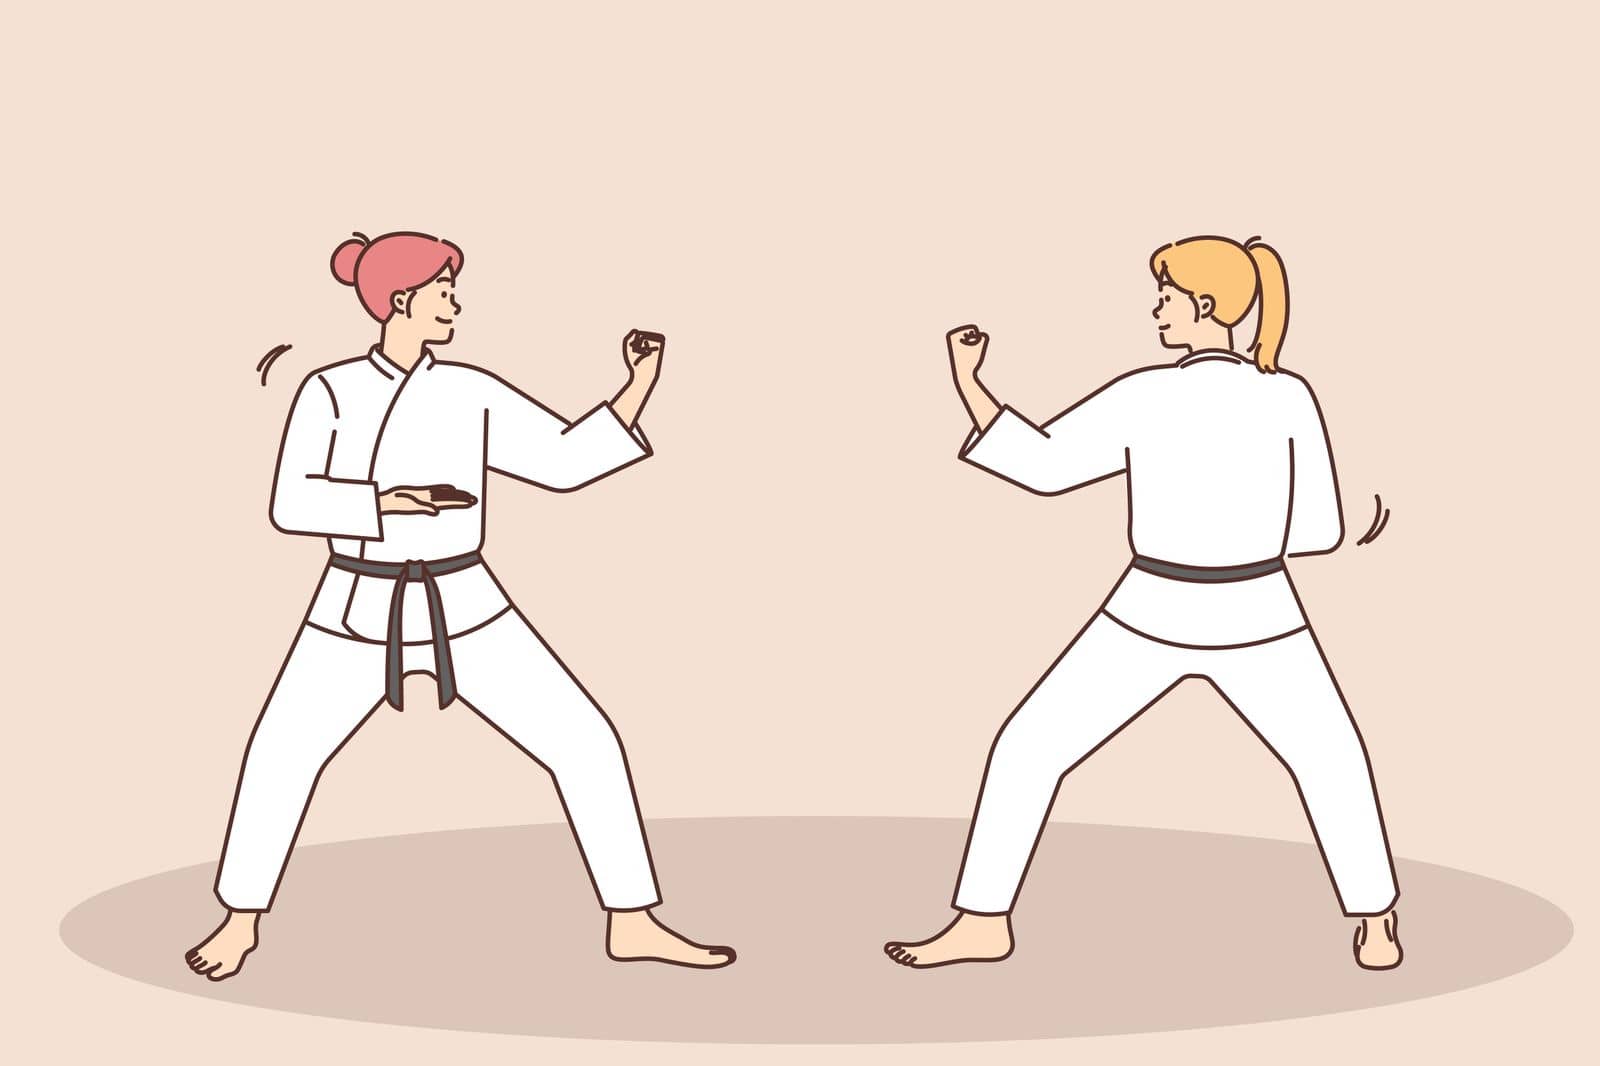 Women in white uniform practice judo fighting. Females engaged in martial arts training. Sport and hobby concept. Vector illustration.